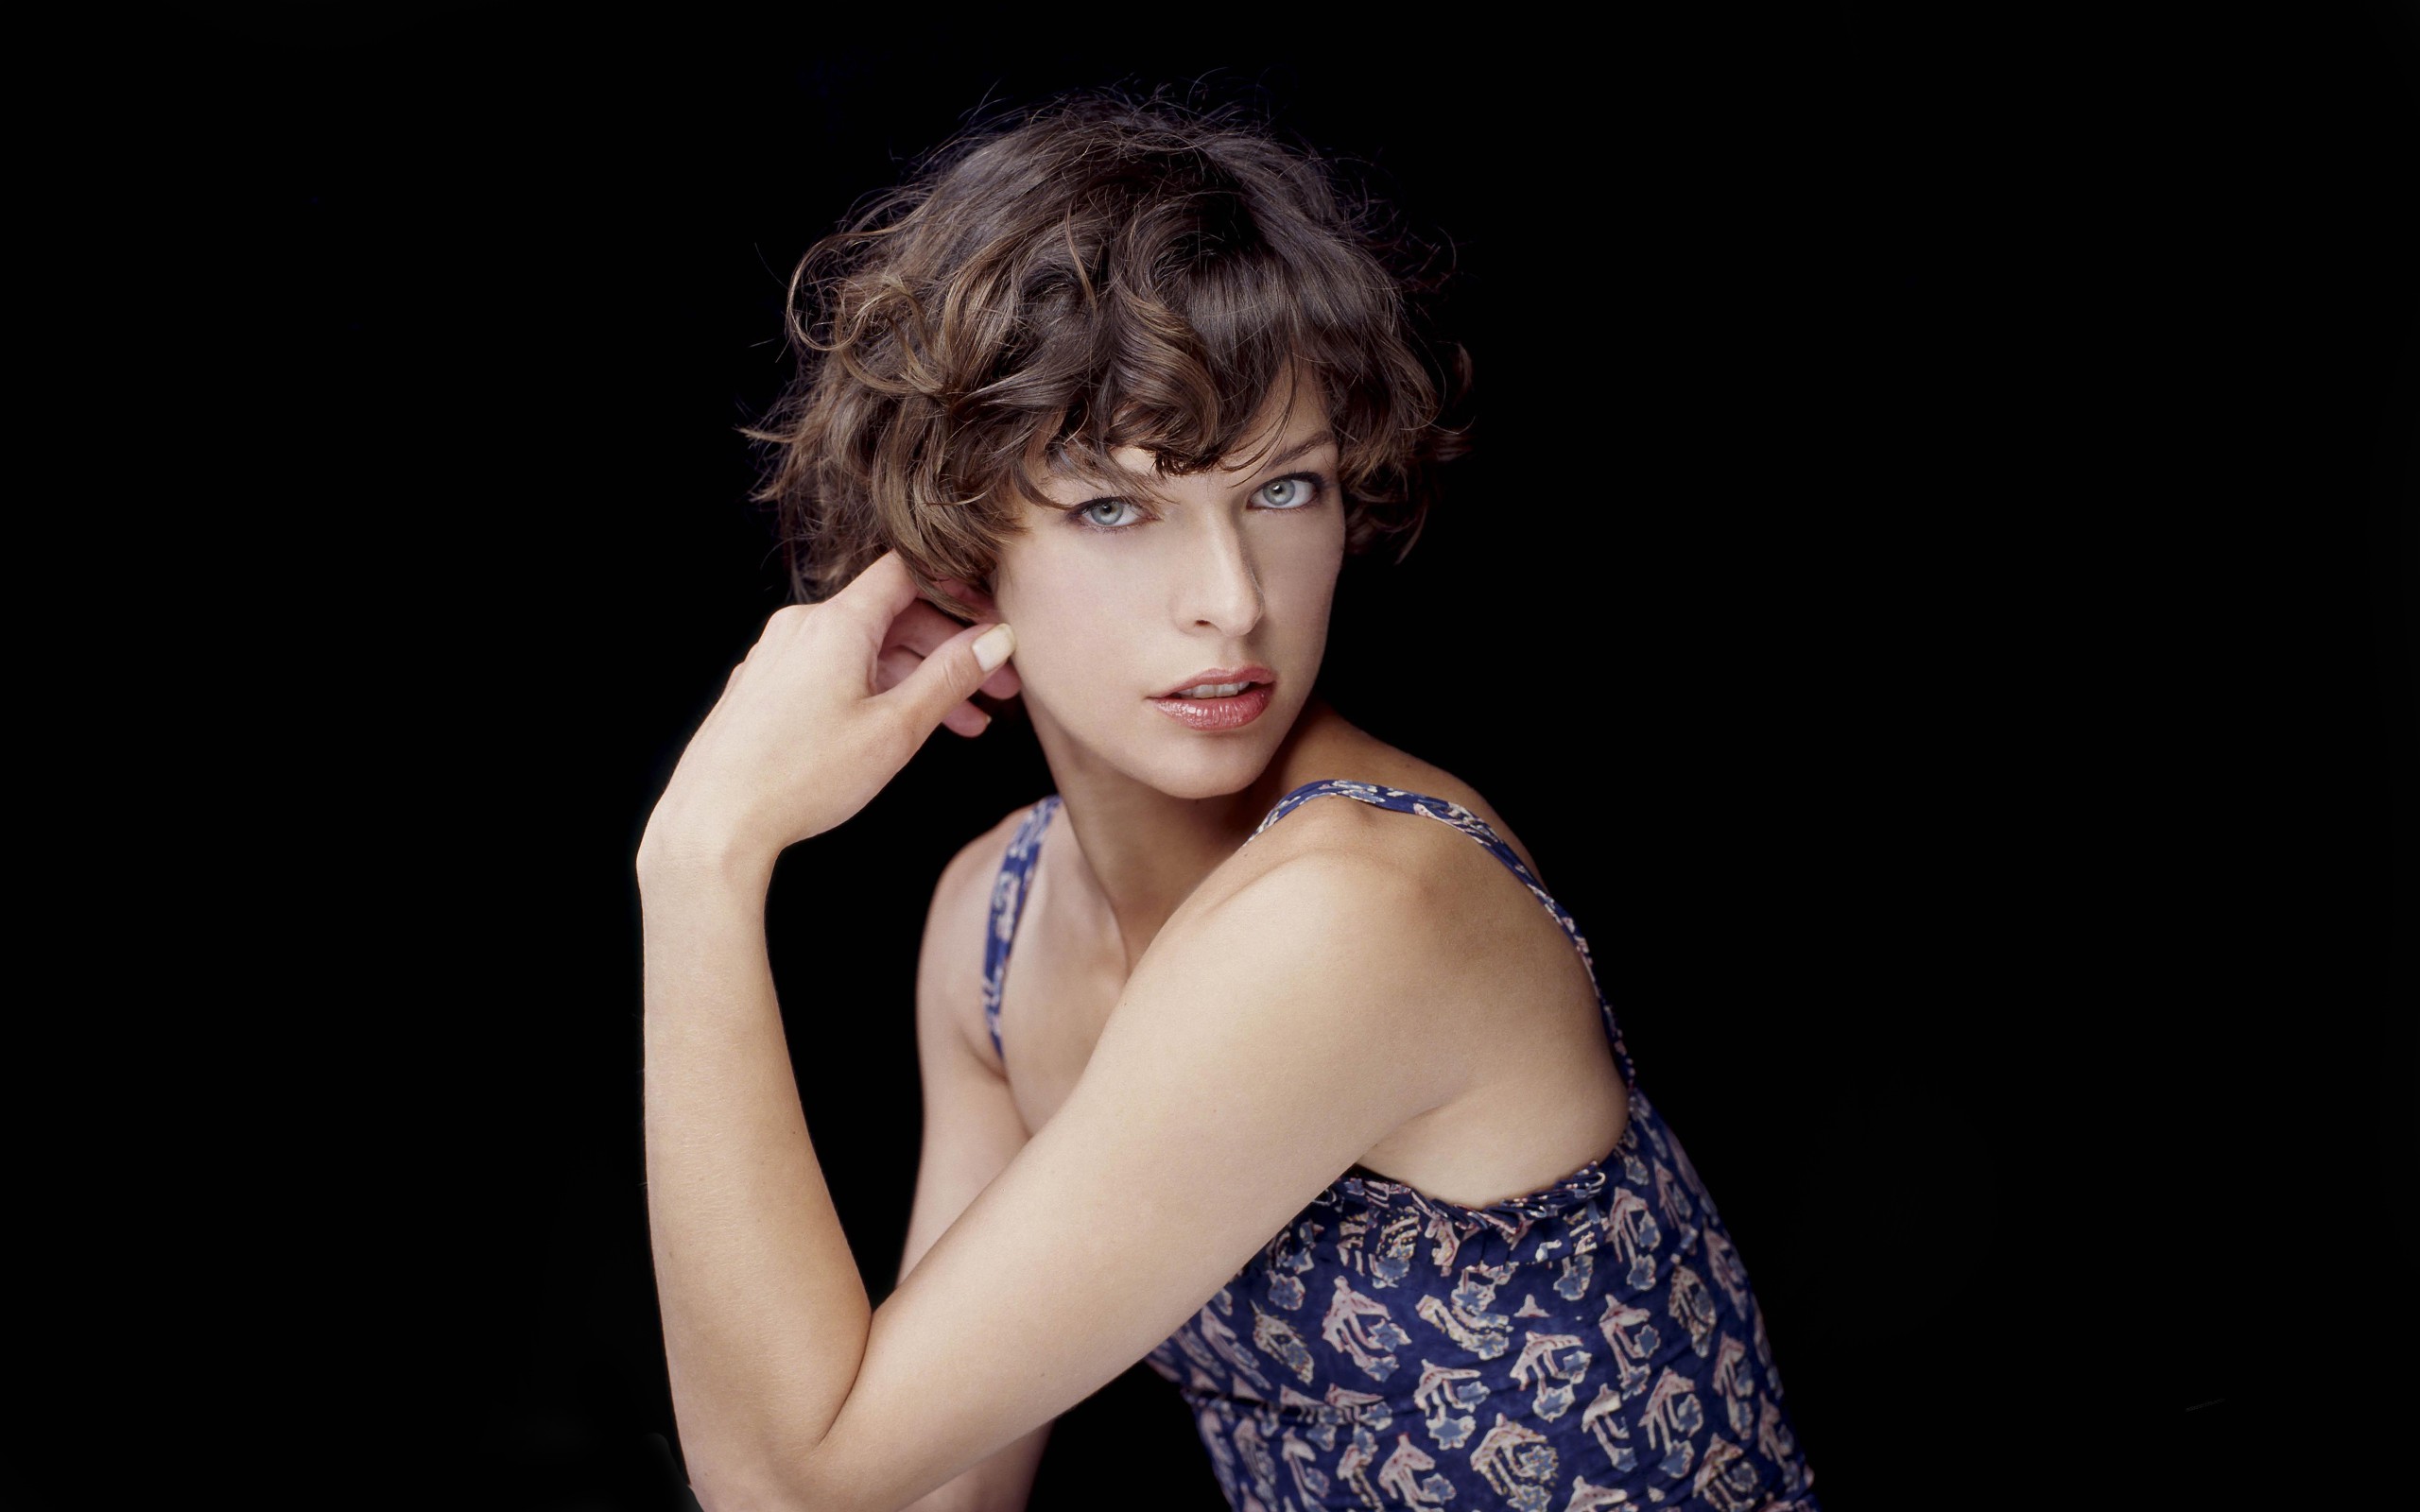 Milla Jovovich Hot & Sexy Topless Photoshoots, Hd Images